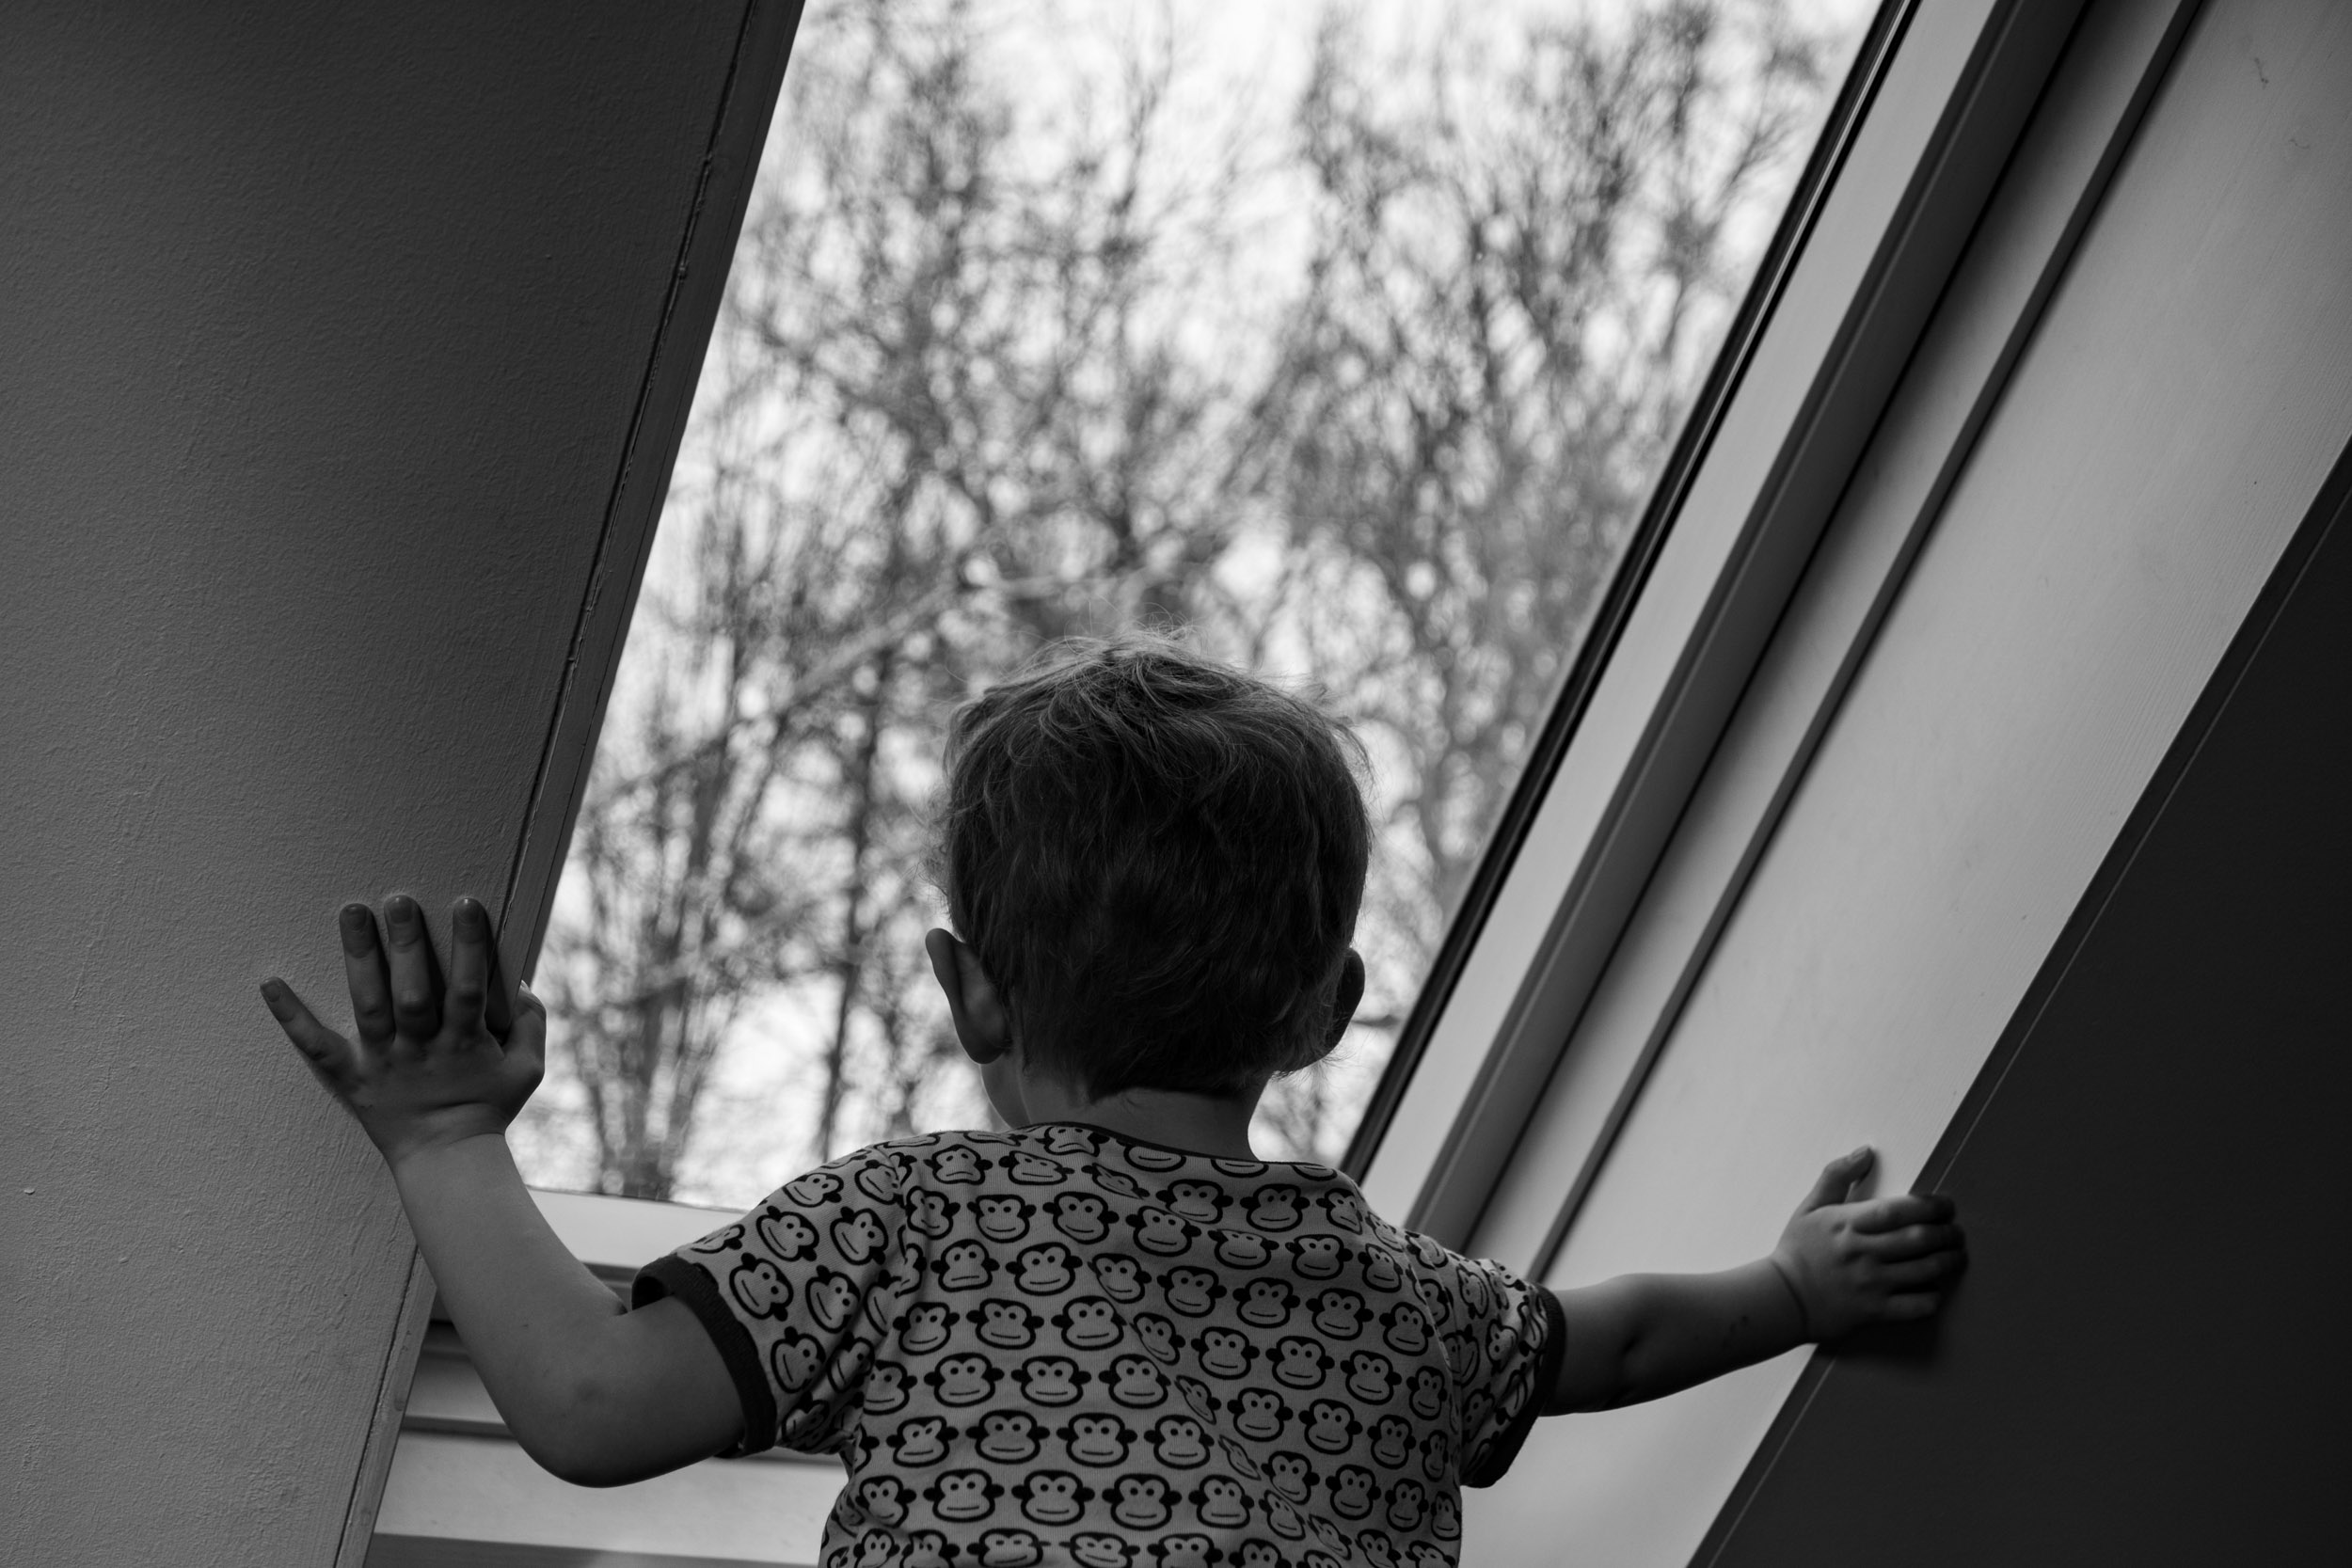 My son trying to spot the woodpecker in the forest behind our house, through the roof window.